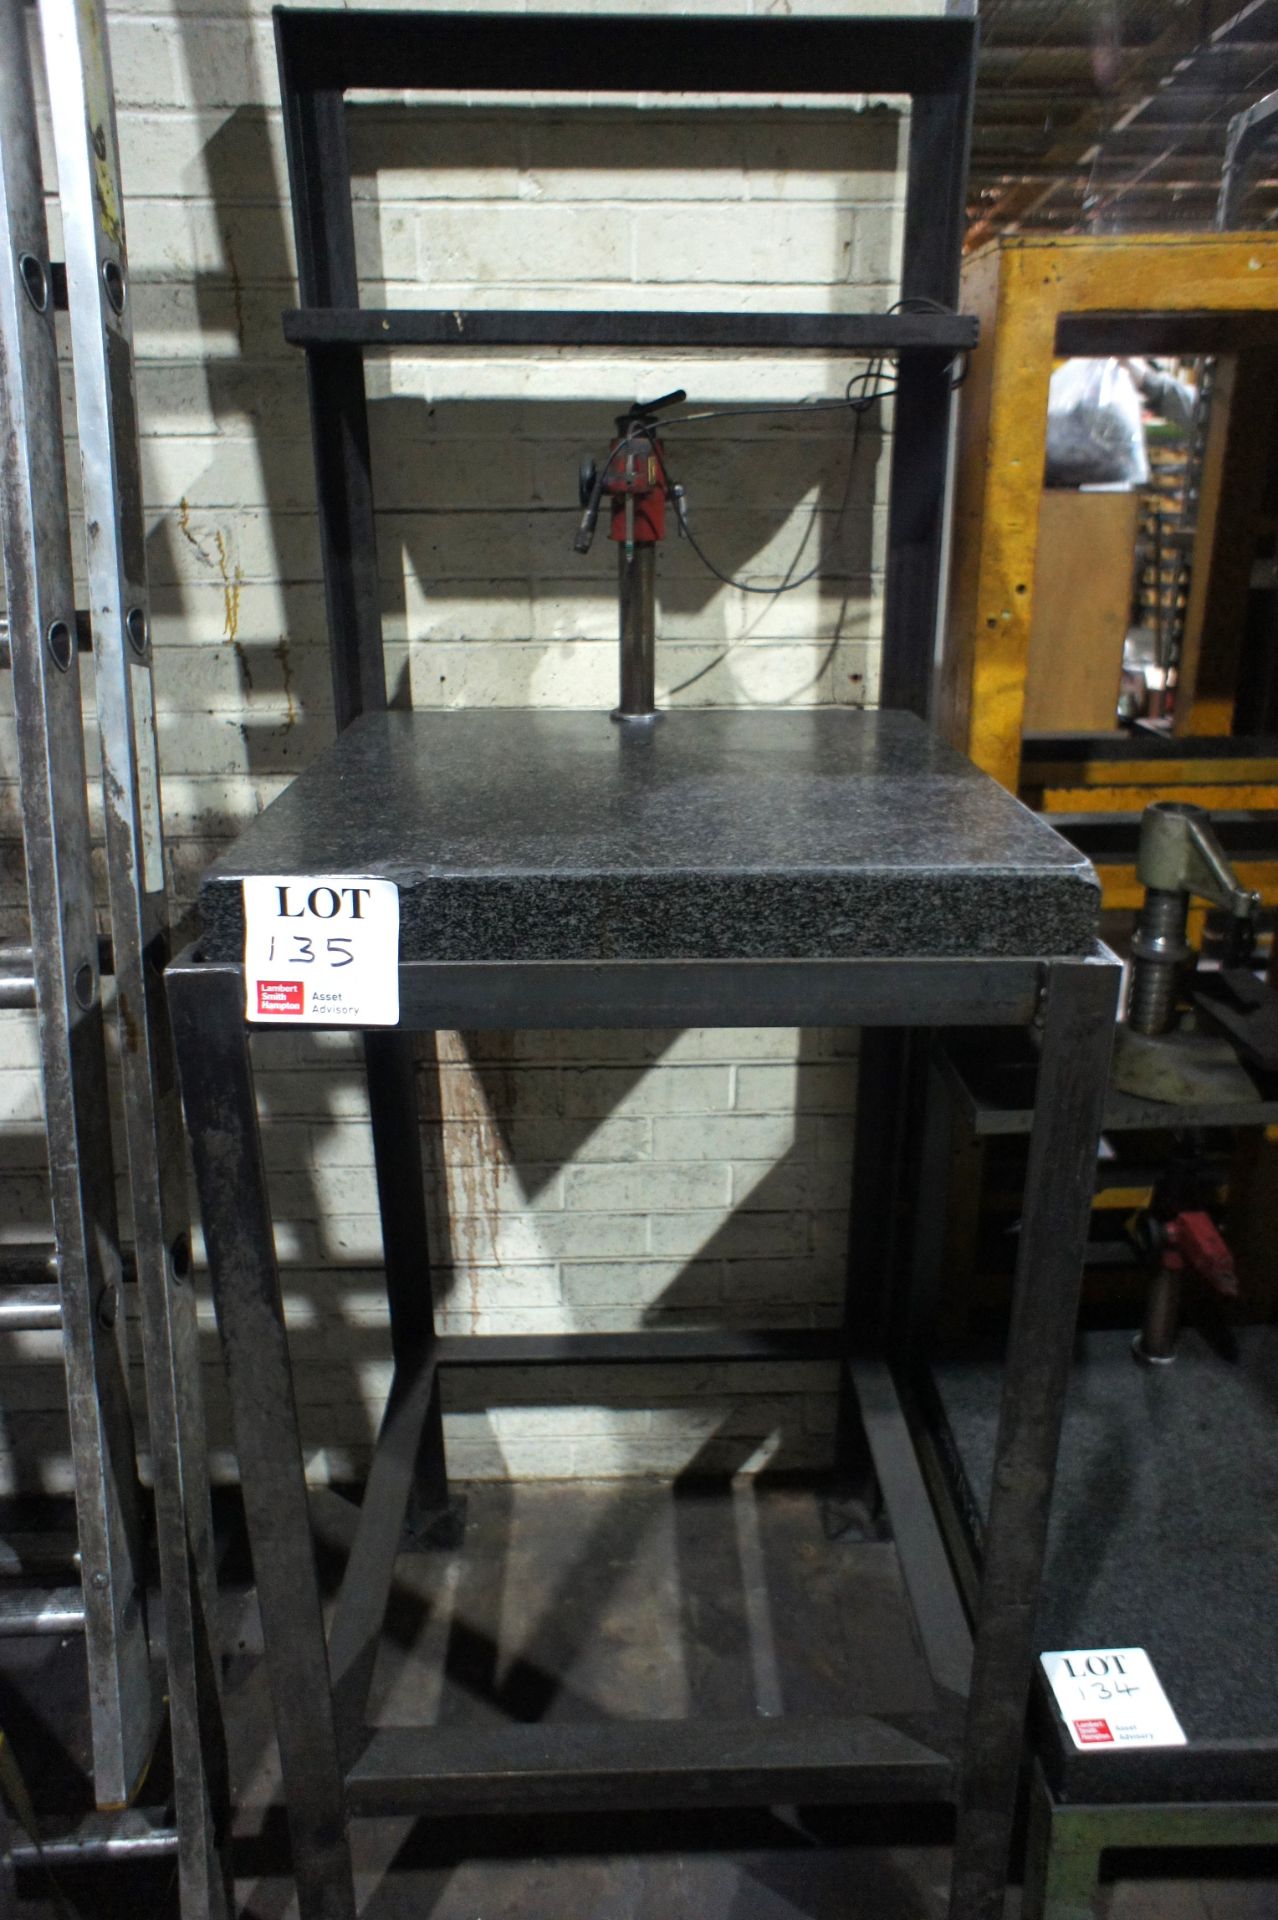 Inspection rig with granite insert 2' x 2'